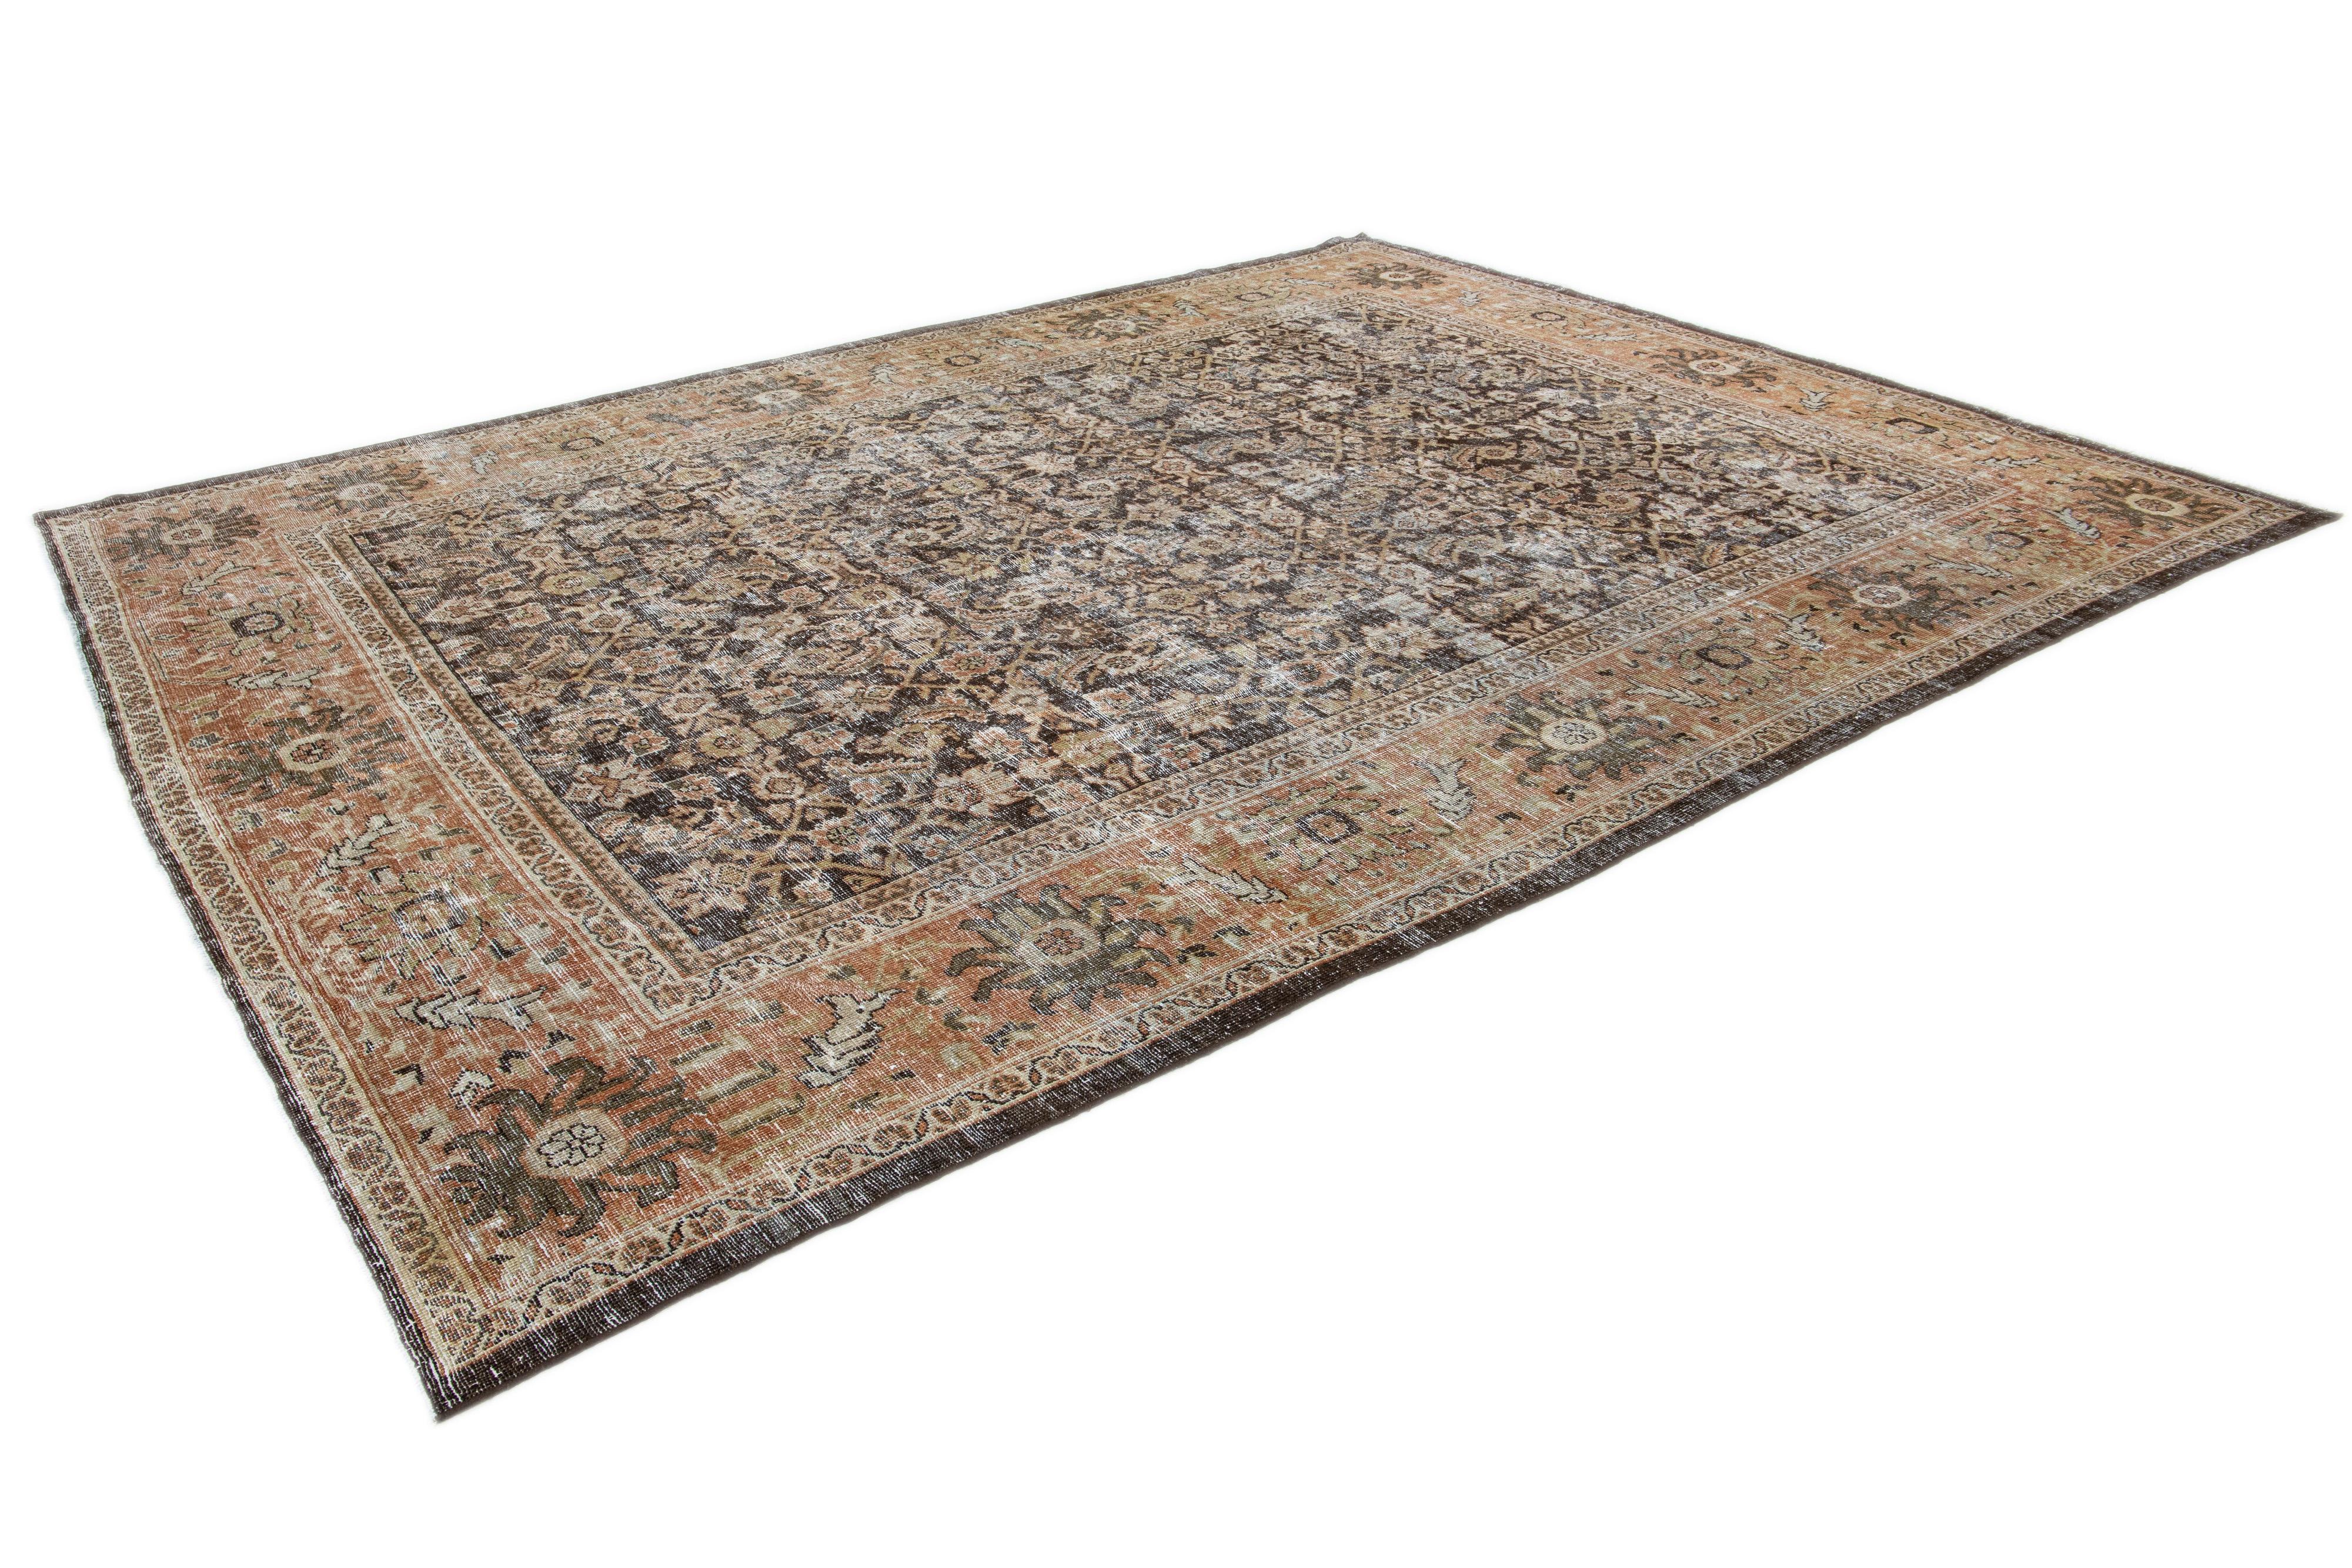 1900s Antique Persian Sultanabad Wool Rug In Brown With Allover Pattern For Sale 5